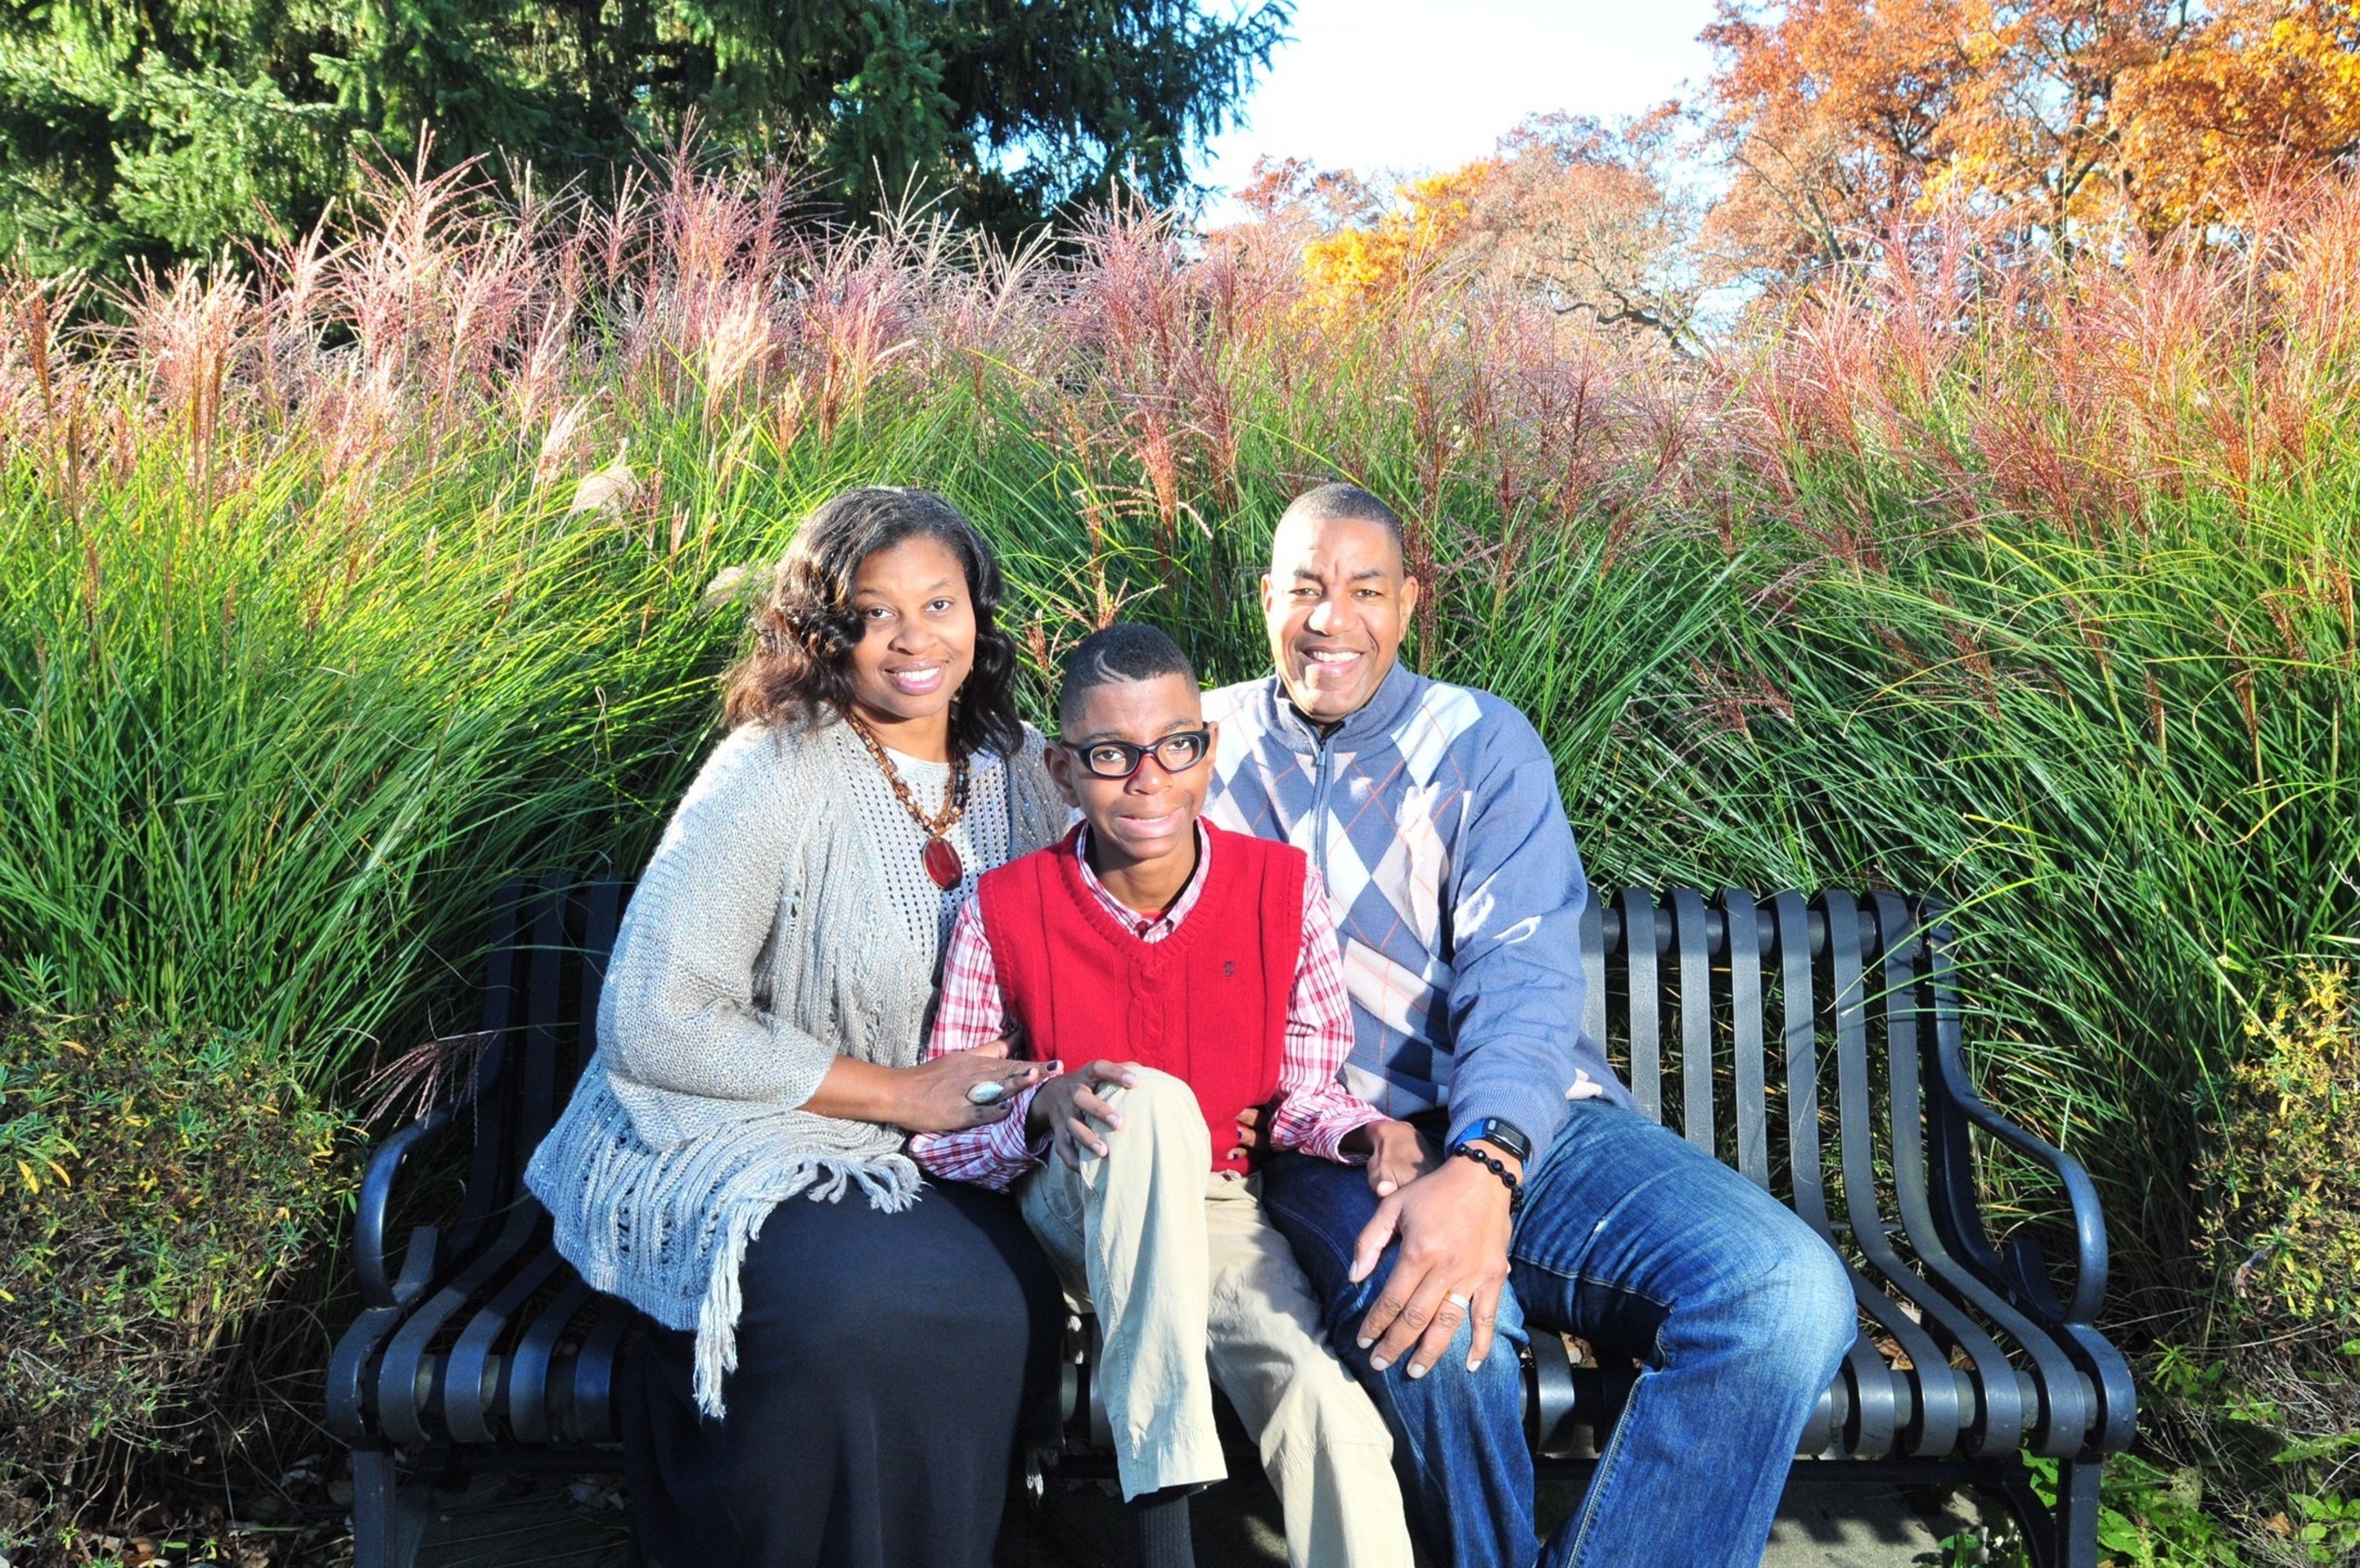 The March of Dimes Foundation's 2015 National Ambassador and family. Pictured are 12-year-old National Ambassador Elijah Jackson (center) with his mom, Elise Jackson (left), and father, Todd Jackson (right).